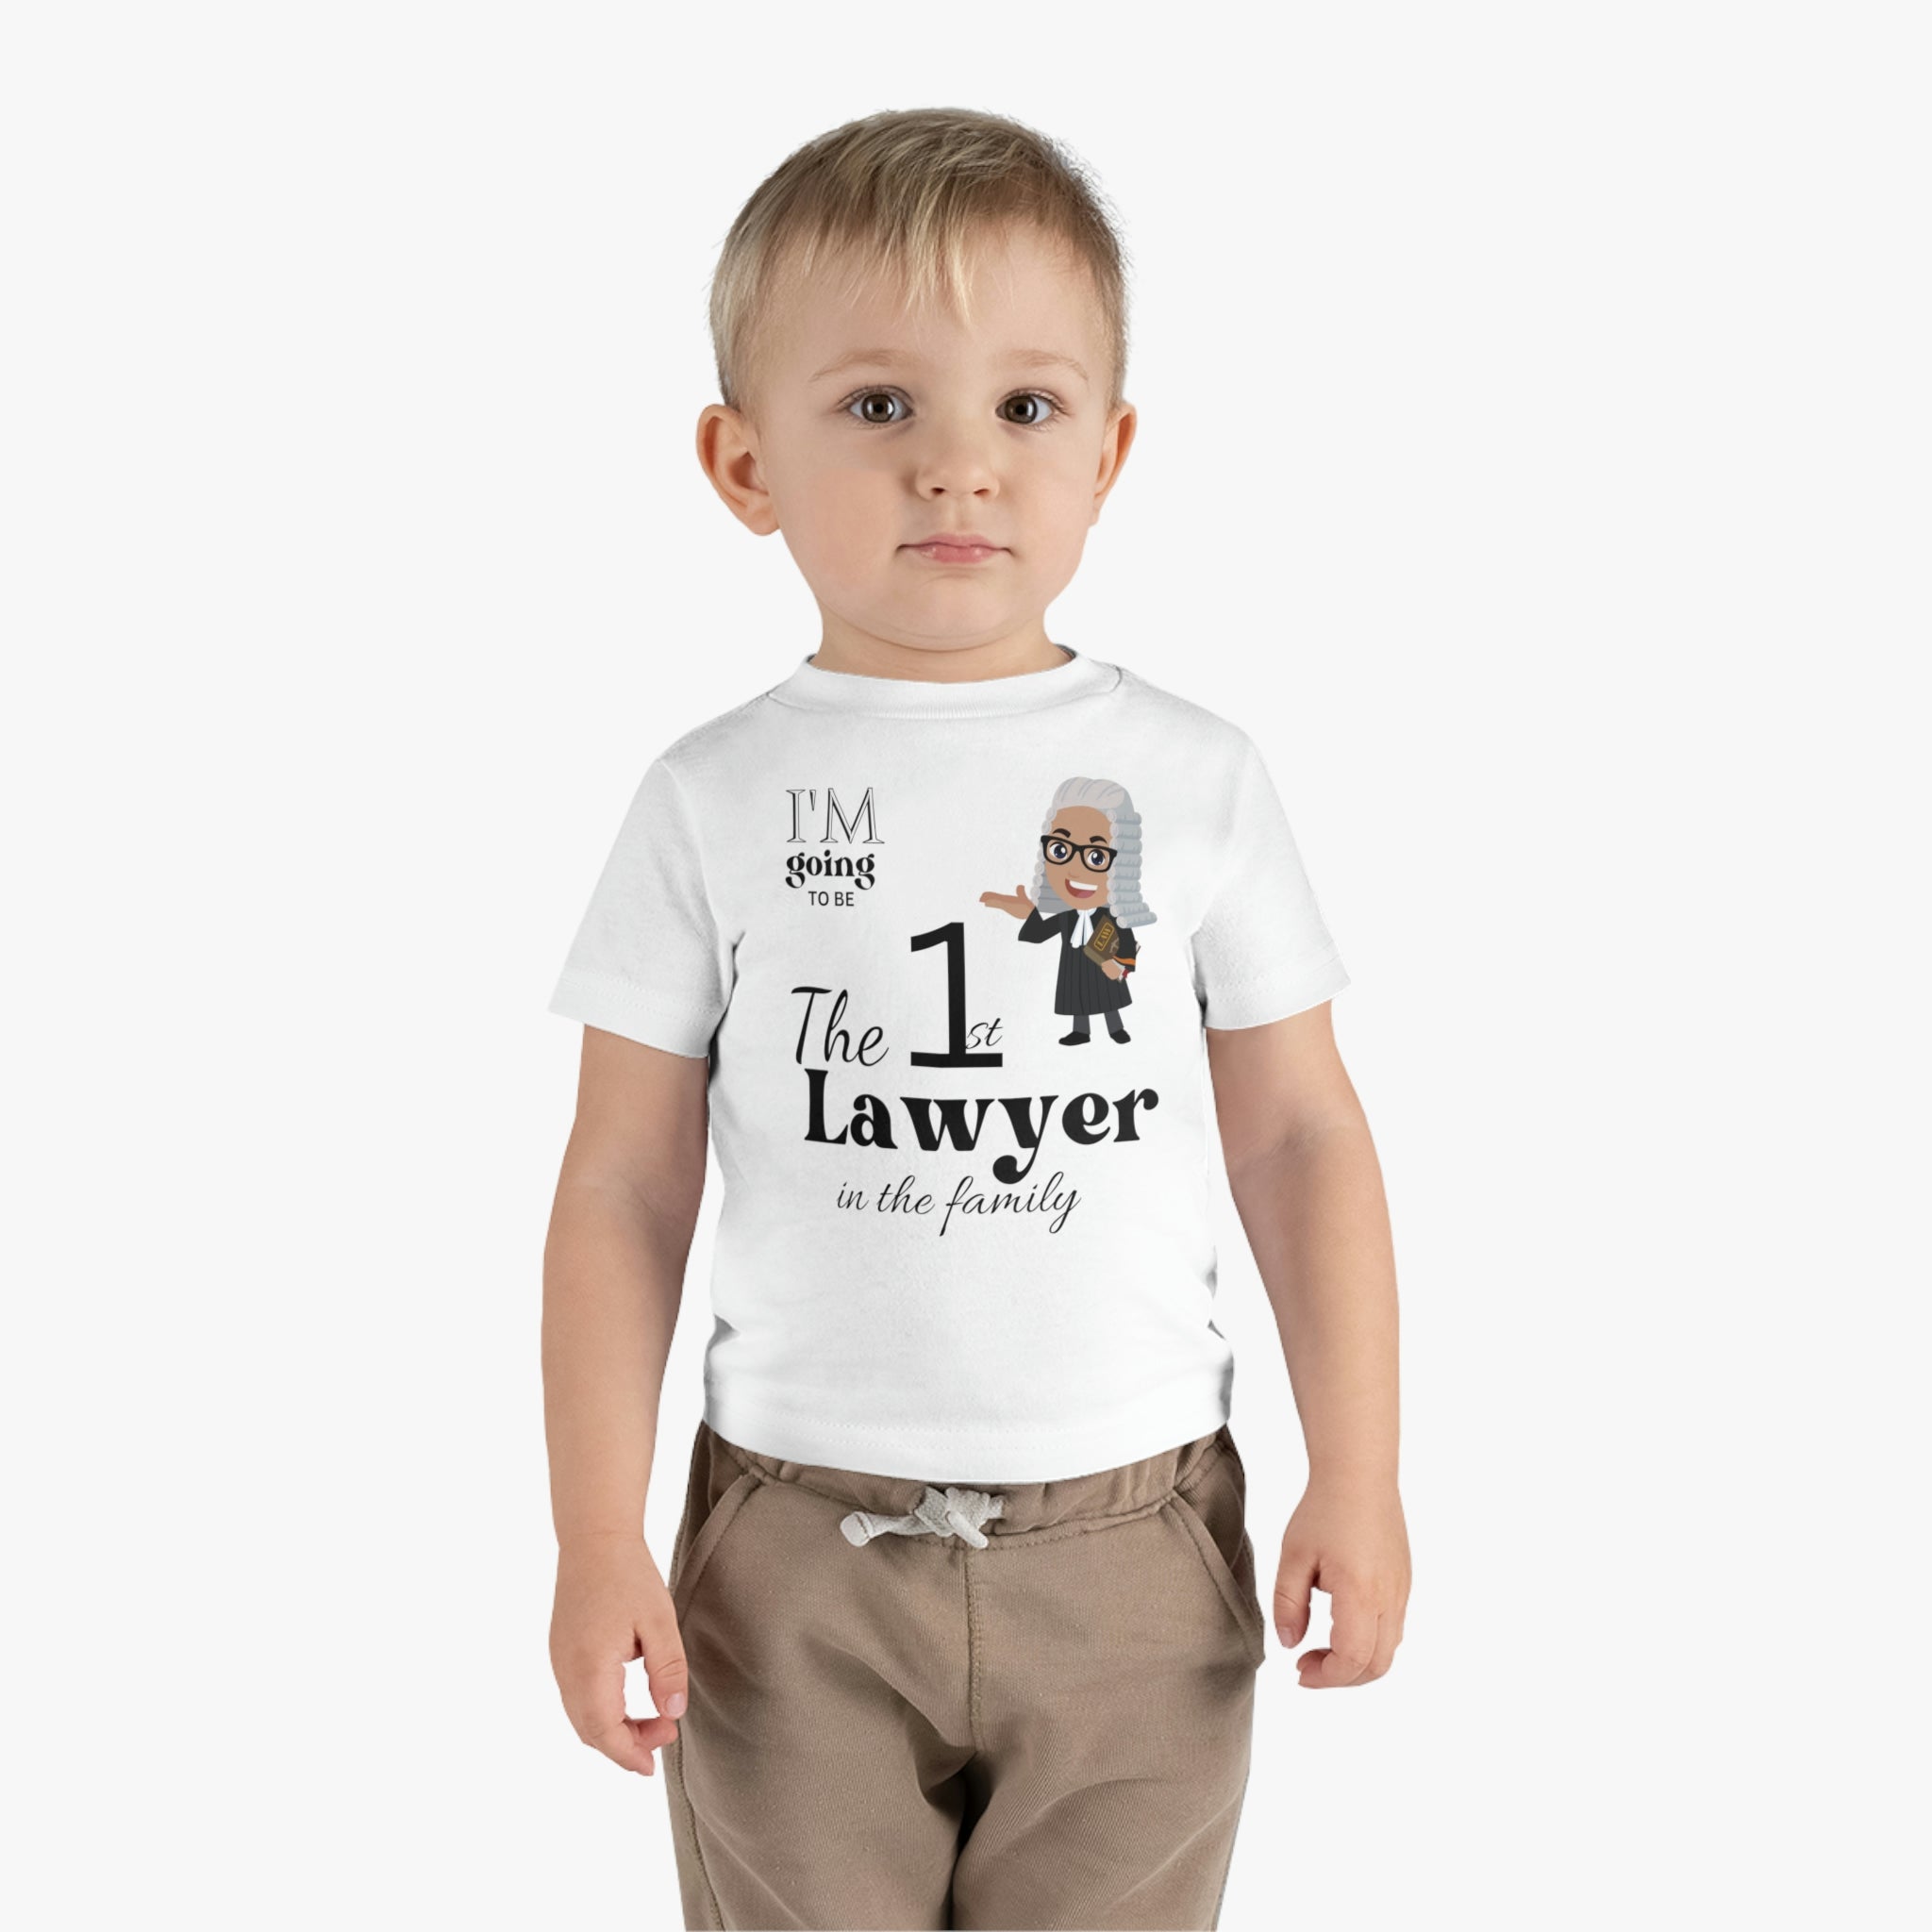 I'm Going To Be The 1st Lawyer In The Family Infant Shirt, Baby Tee, Infant Tee